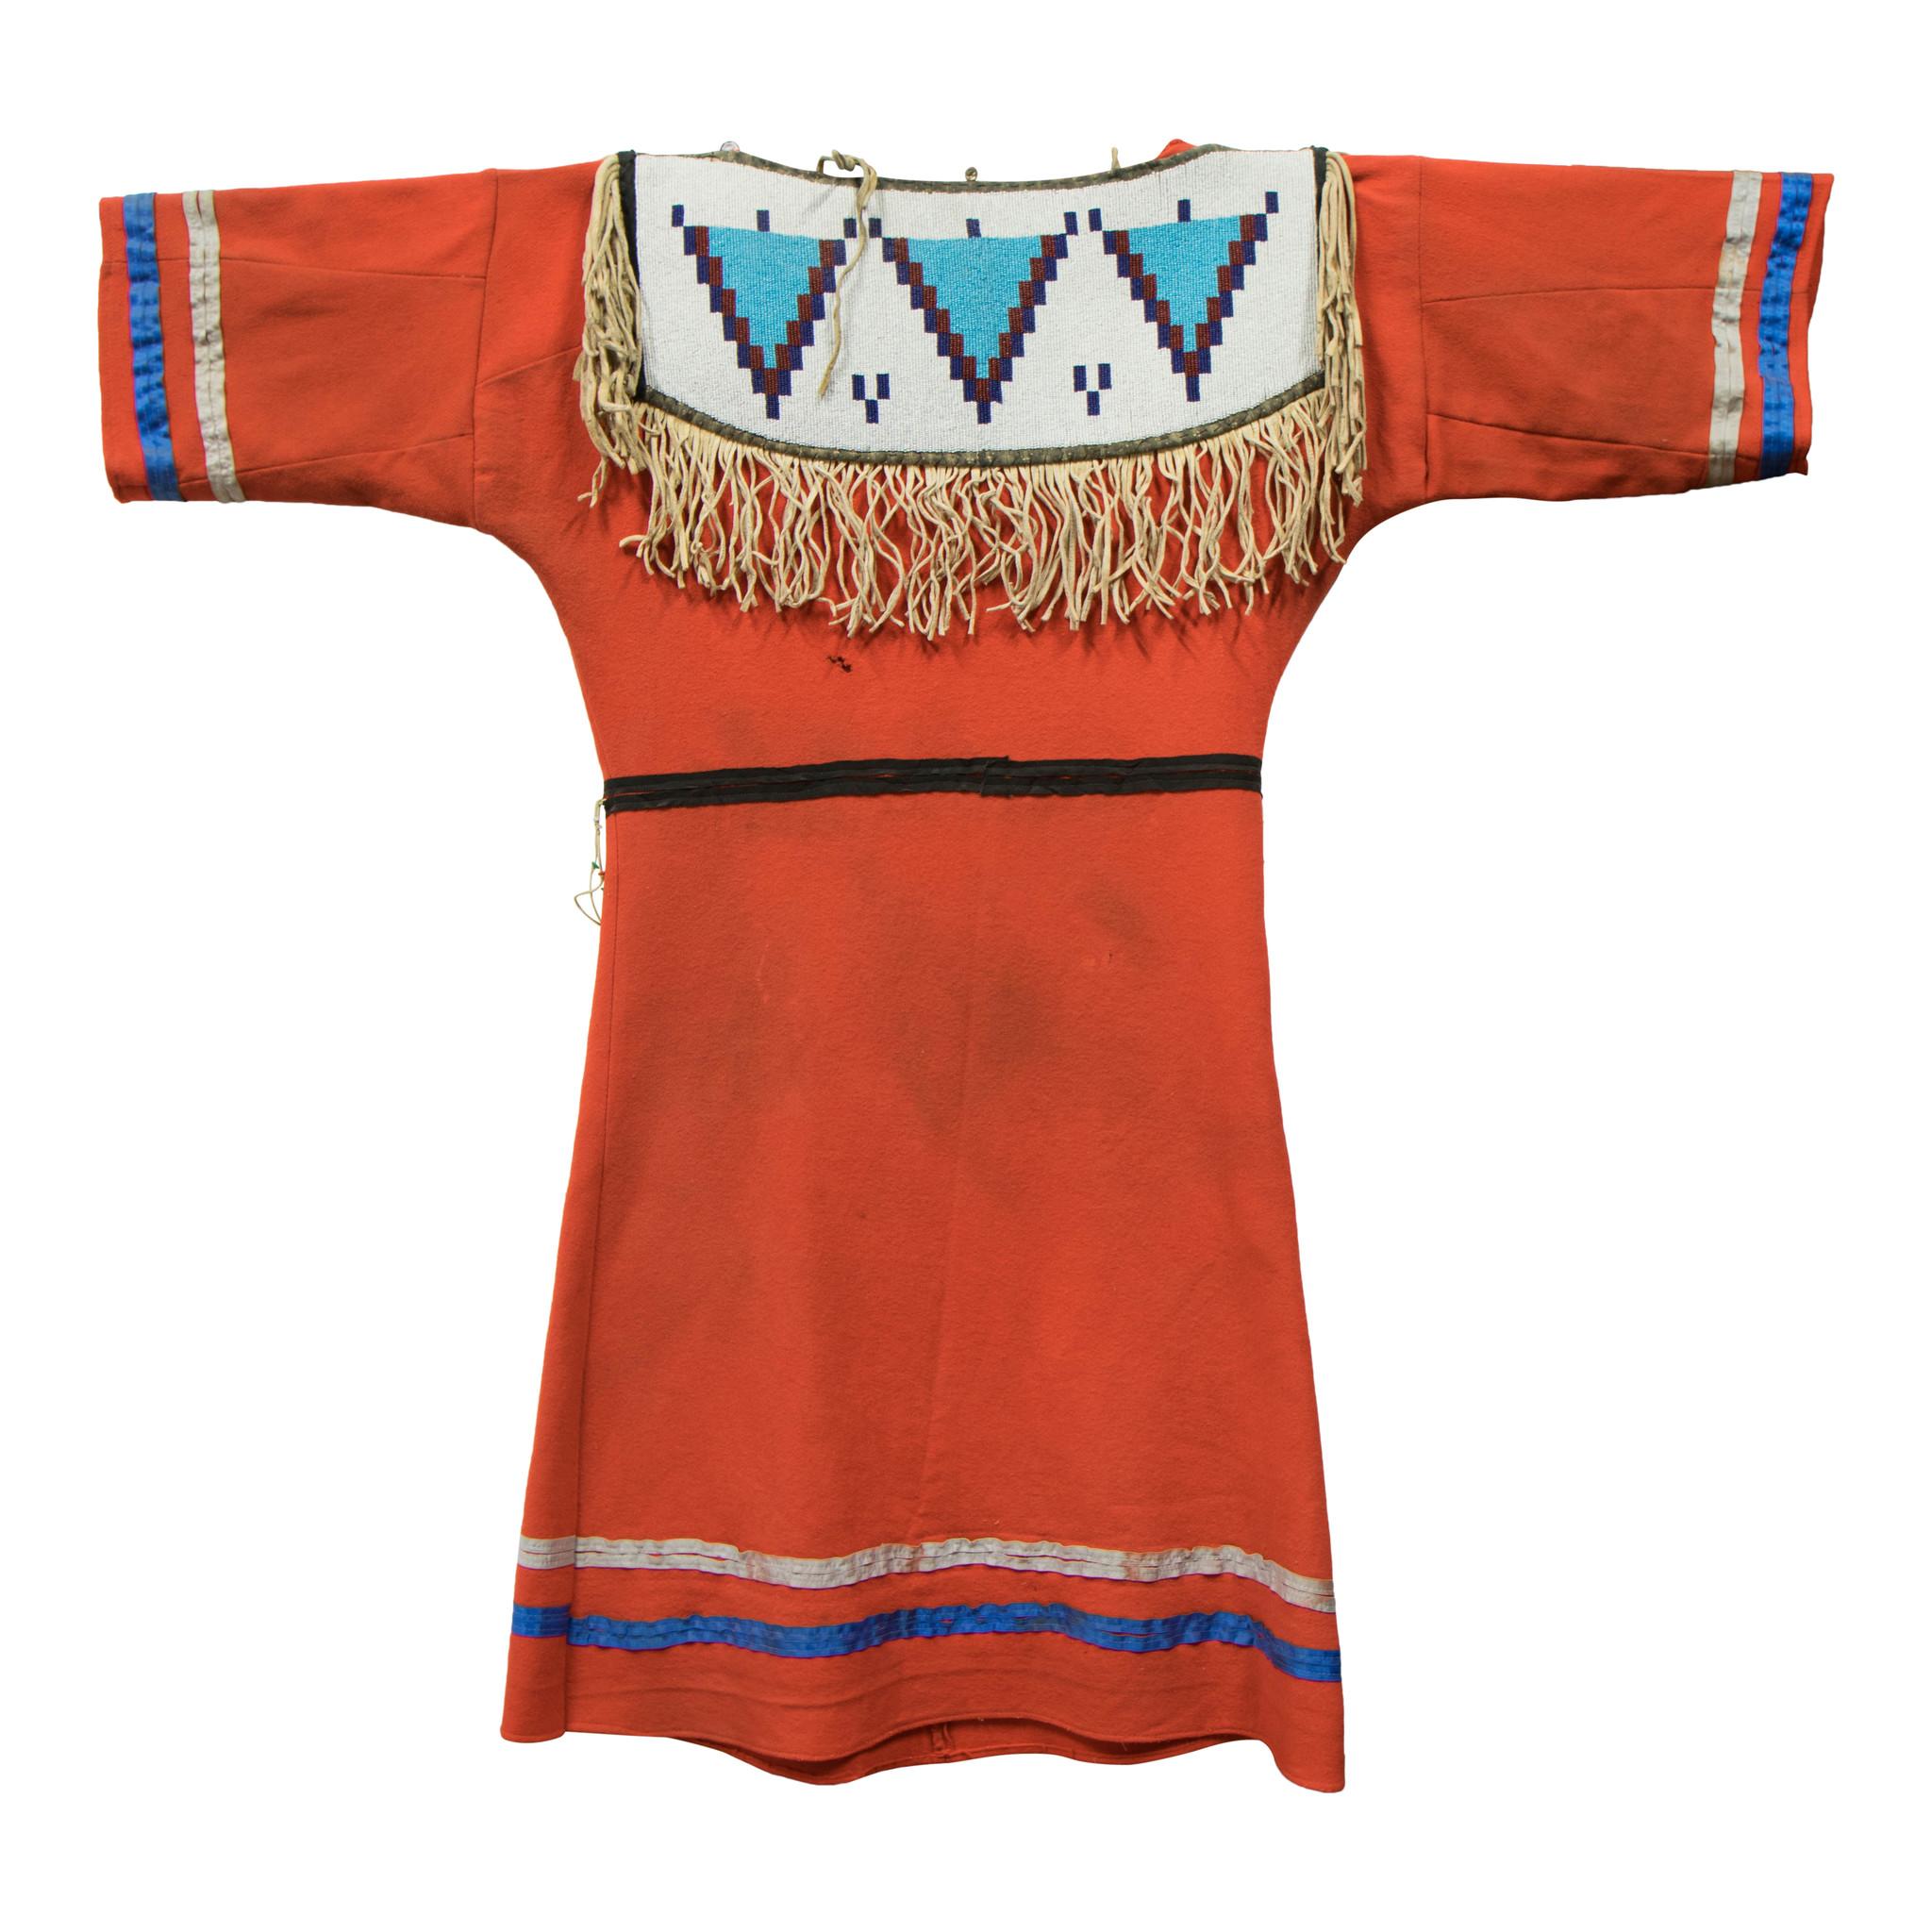 Blackfoot dress of red Stroud. Estimated 1920s. Beads on panels both sides carried over from 19th century.

Period: 1920s

Origin: Blackfoot

Size: 40